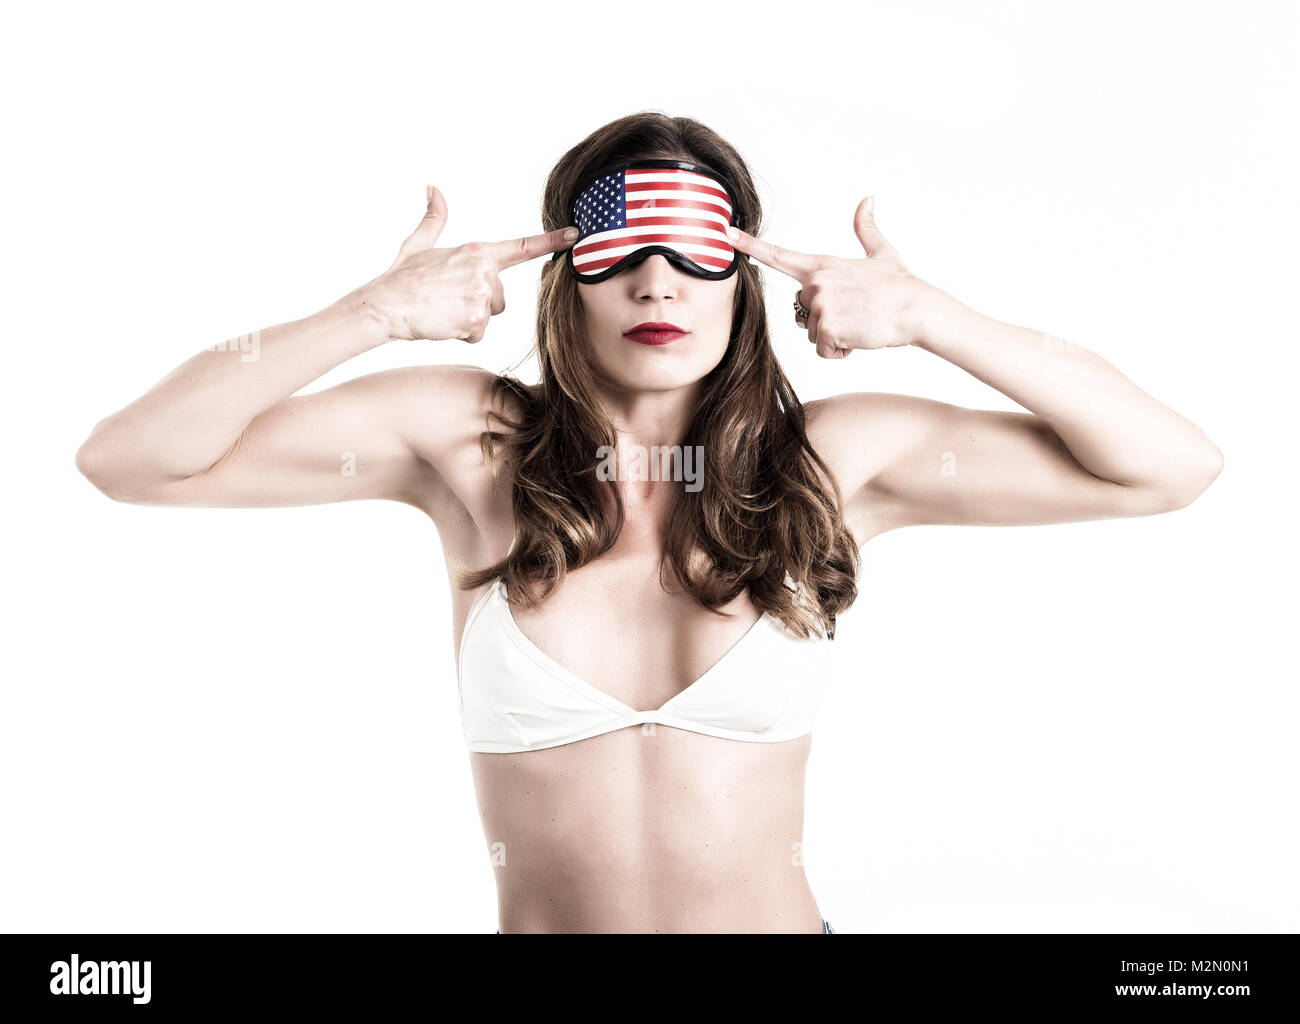 Young woman wearing eyemask. American Dream concept. Isolated on white background. Toned Image. Stock Photo